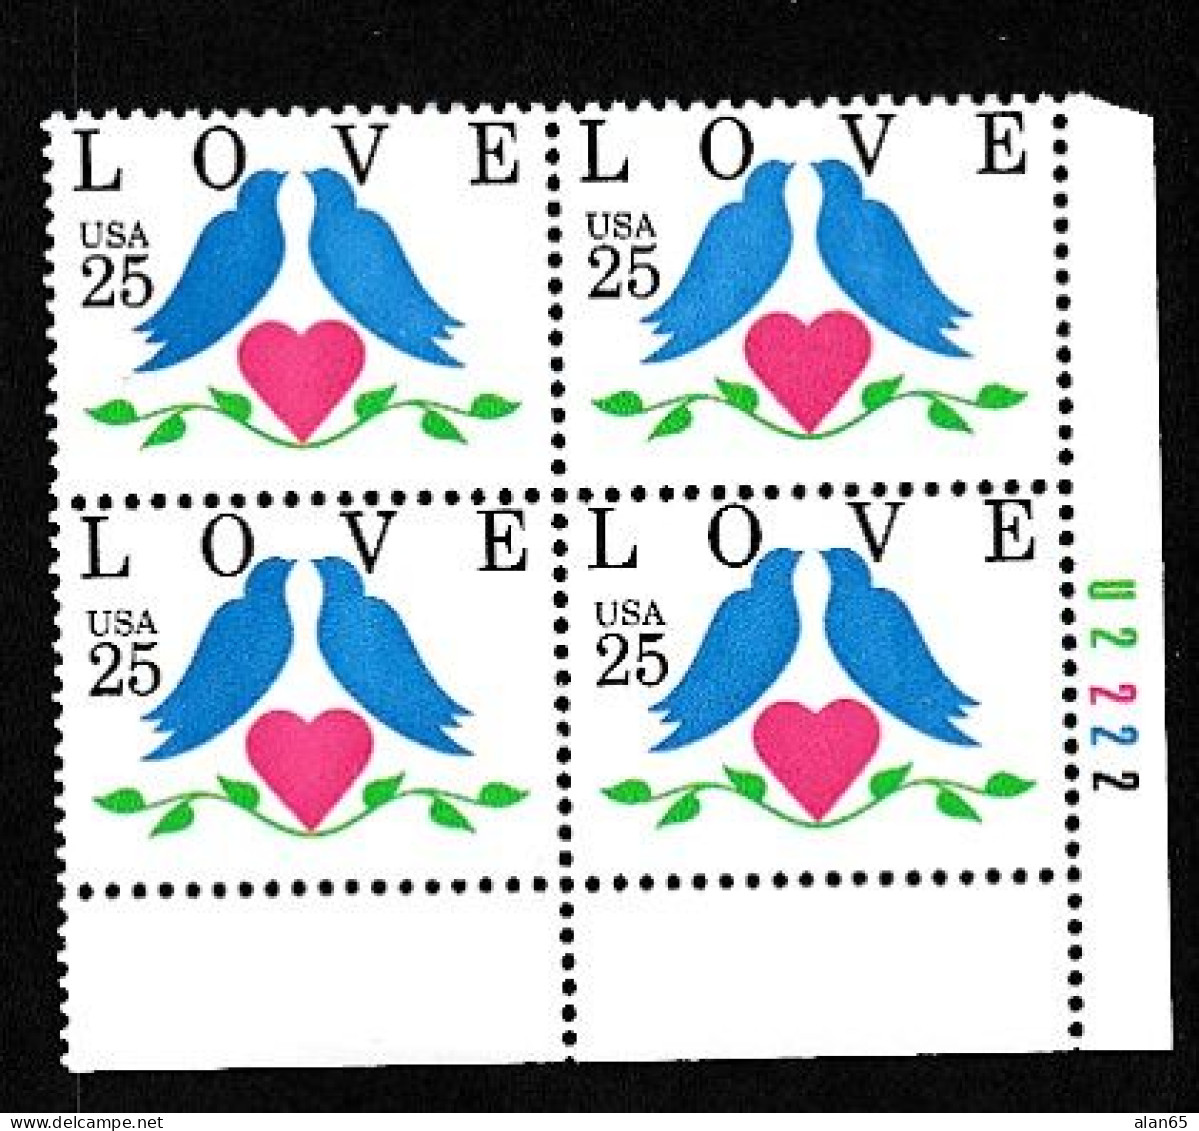 Sc#2440 'Love' Birds And Heart, 25-cent 1990 Issue, Plate # Block Of 4 MNH US Postage Stamps - Plaatnummers